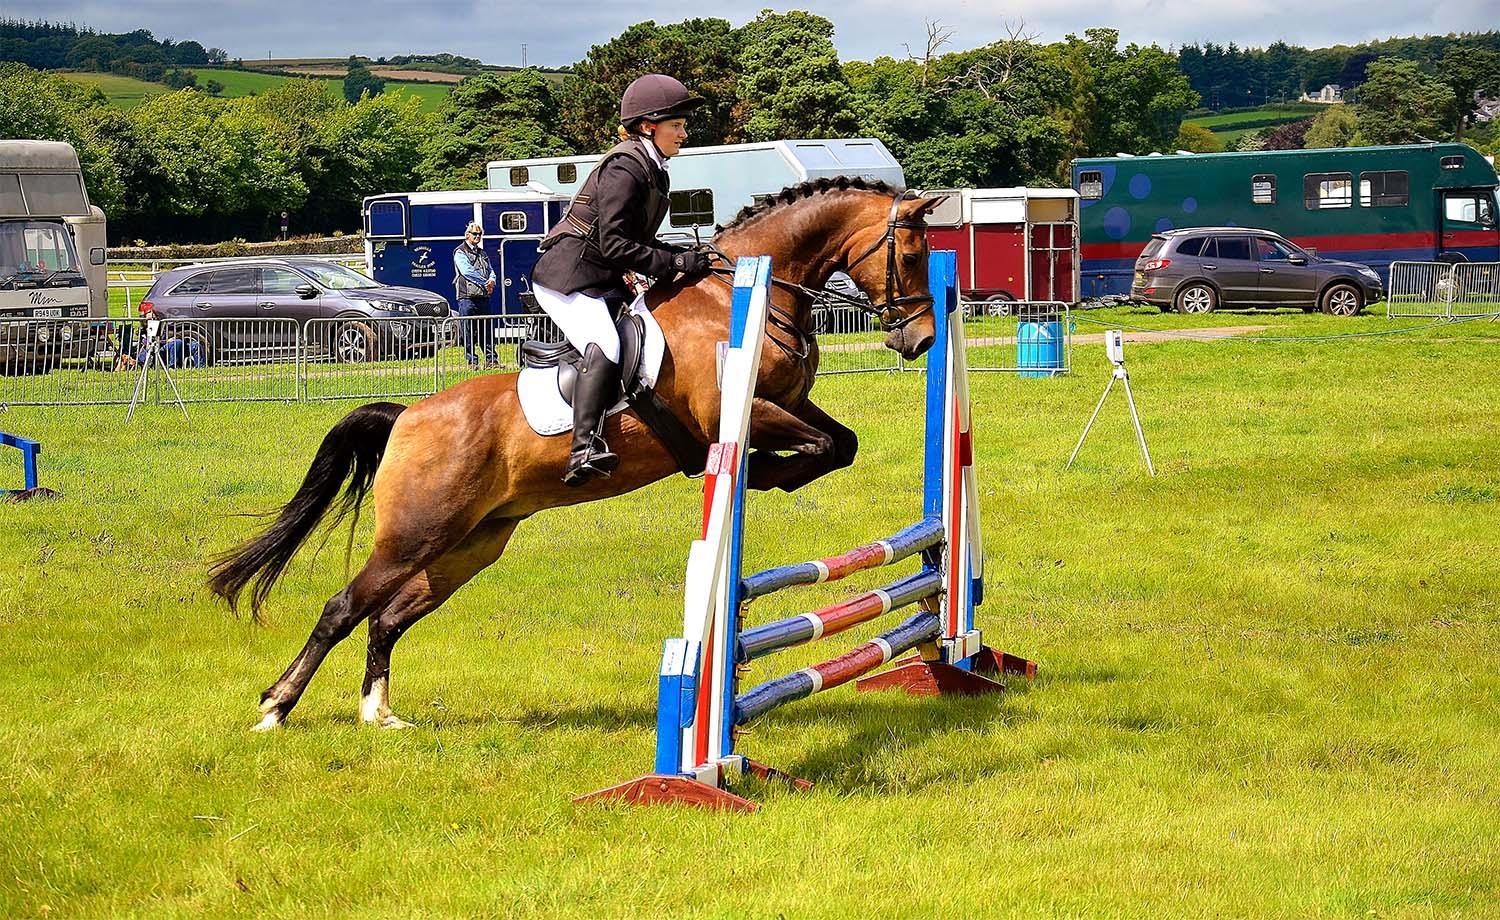 Horse jumping over an obstacle at an equine event